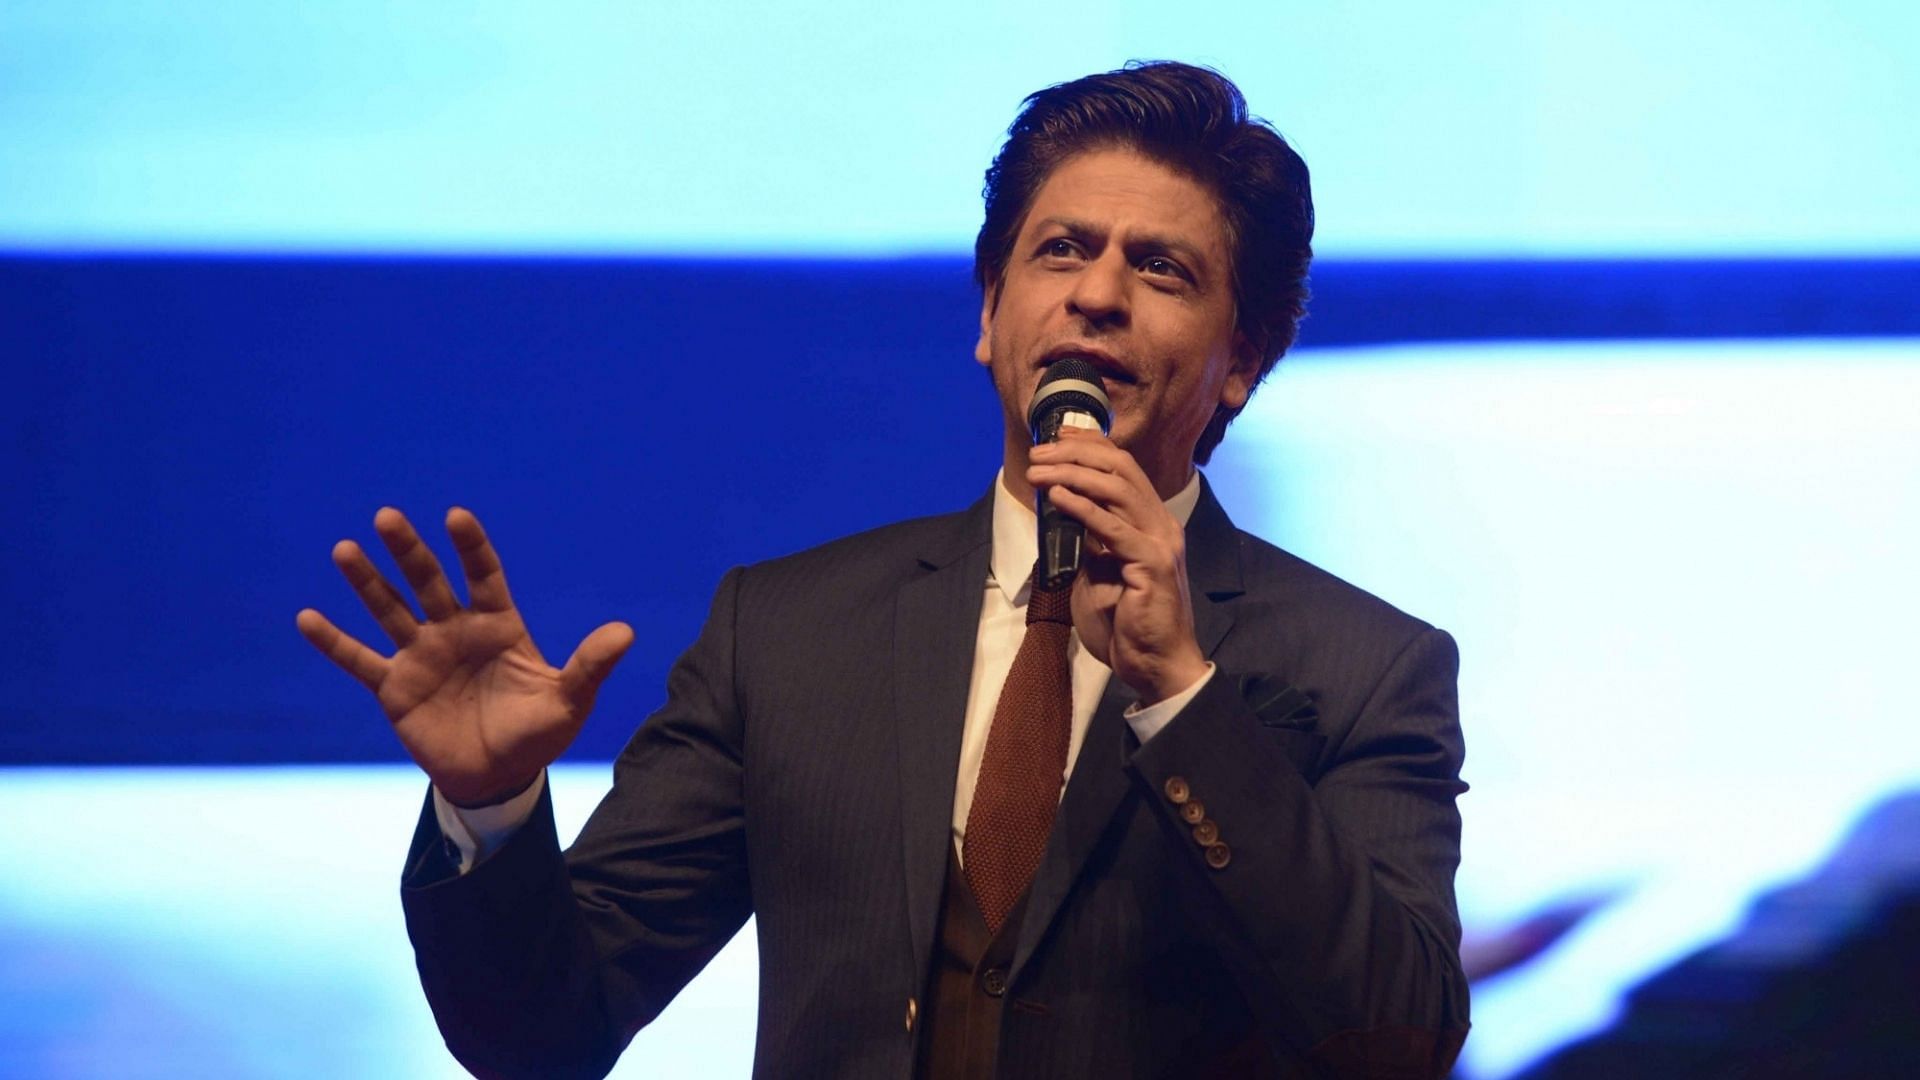 Shah Rukh Khan has been granted an honorary doctorate by Australia’s La Trobe University for his humanitarian work.